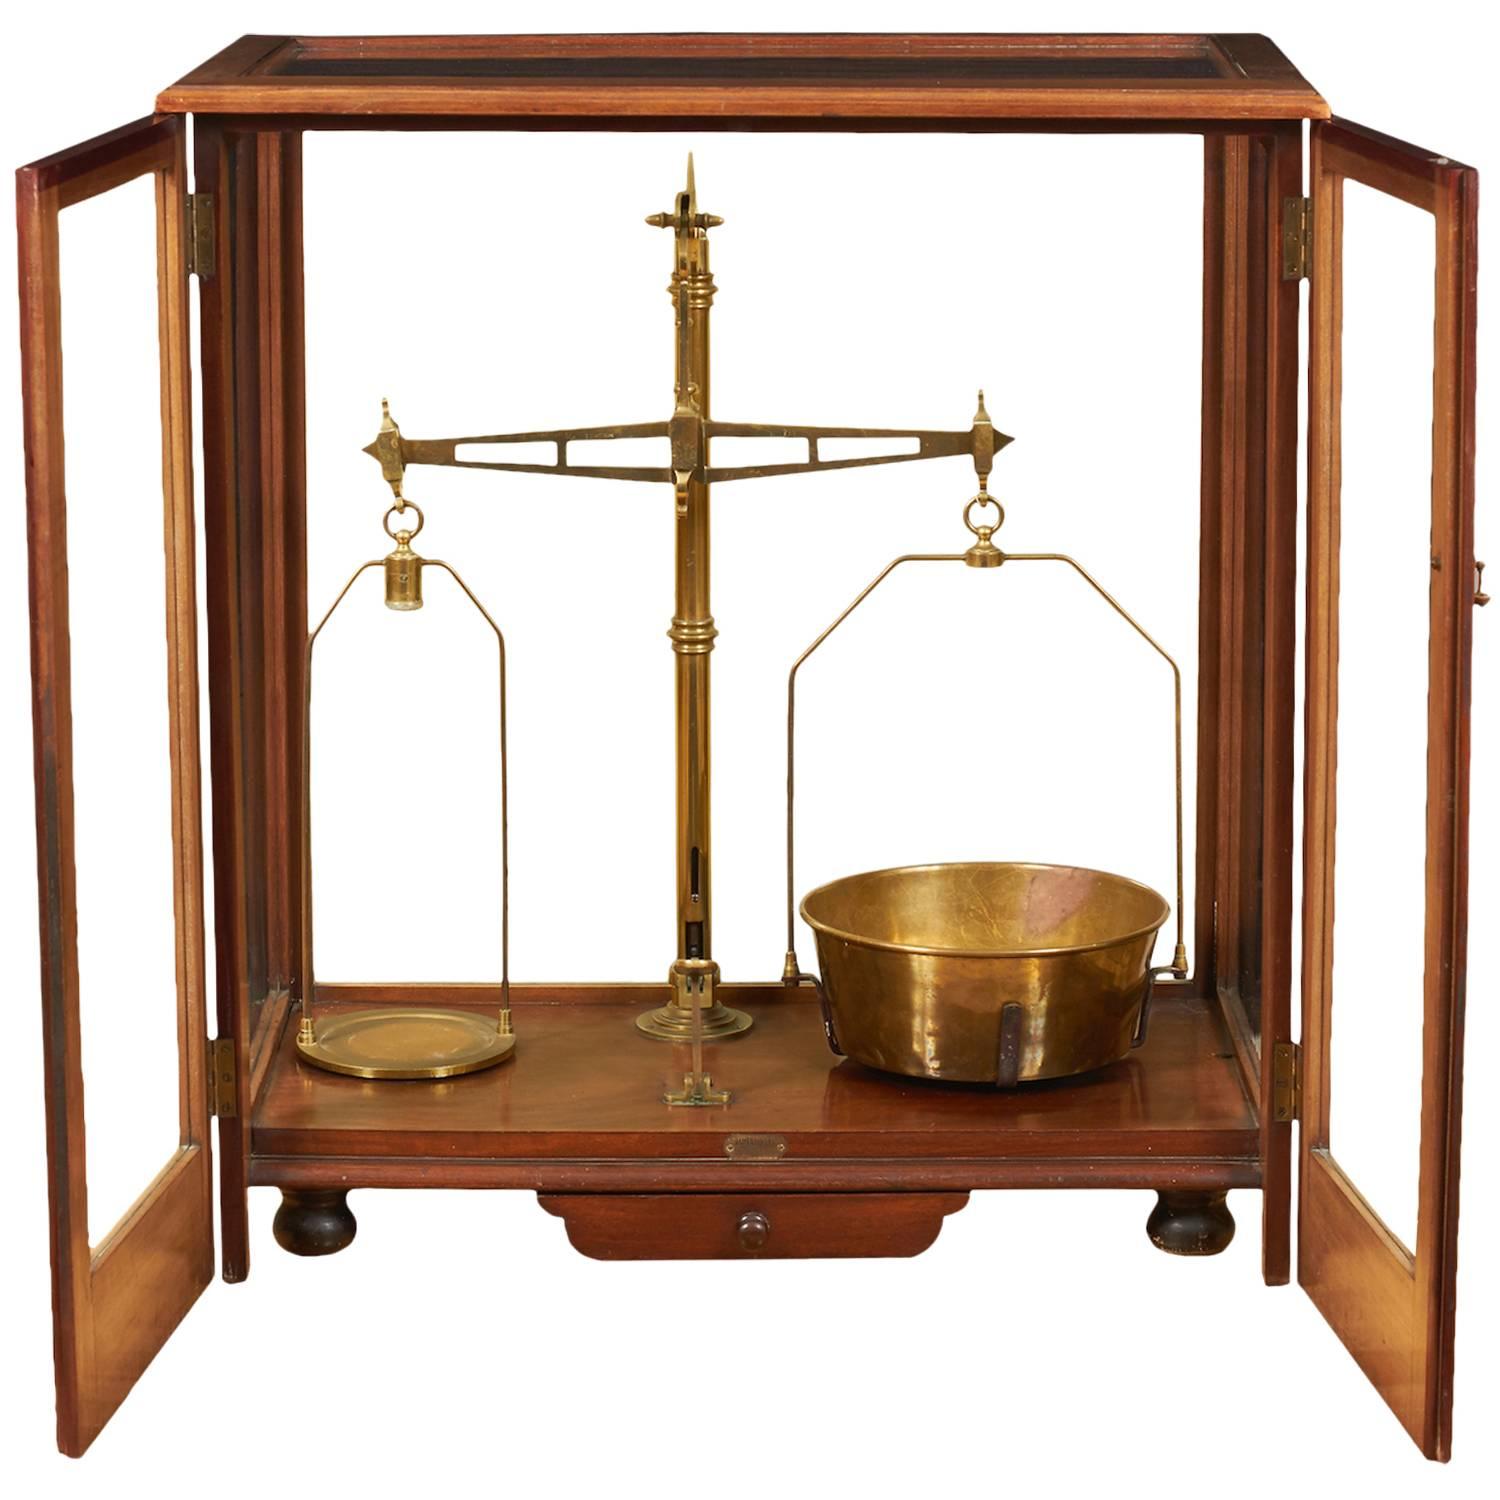 Three Foot Tall Cased Brass and Mahogany Balance by J.H. Heal Co.